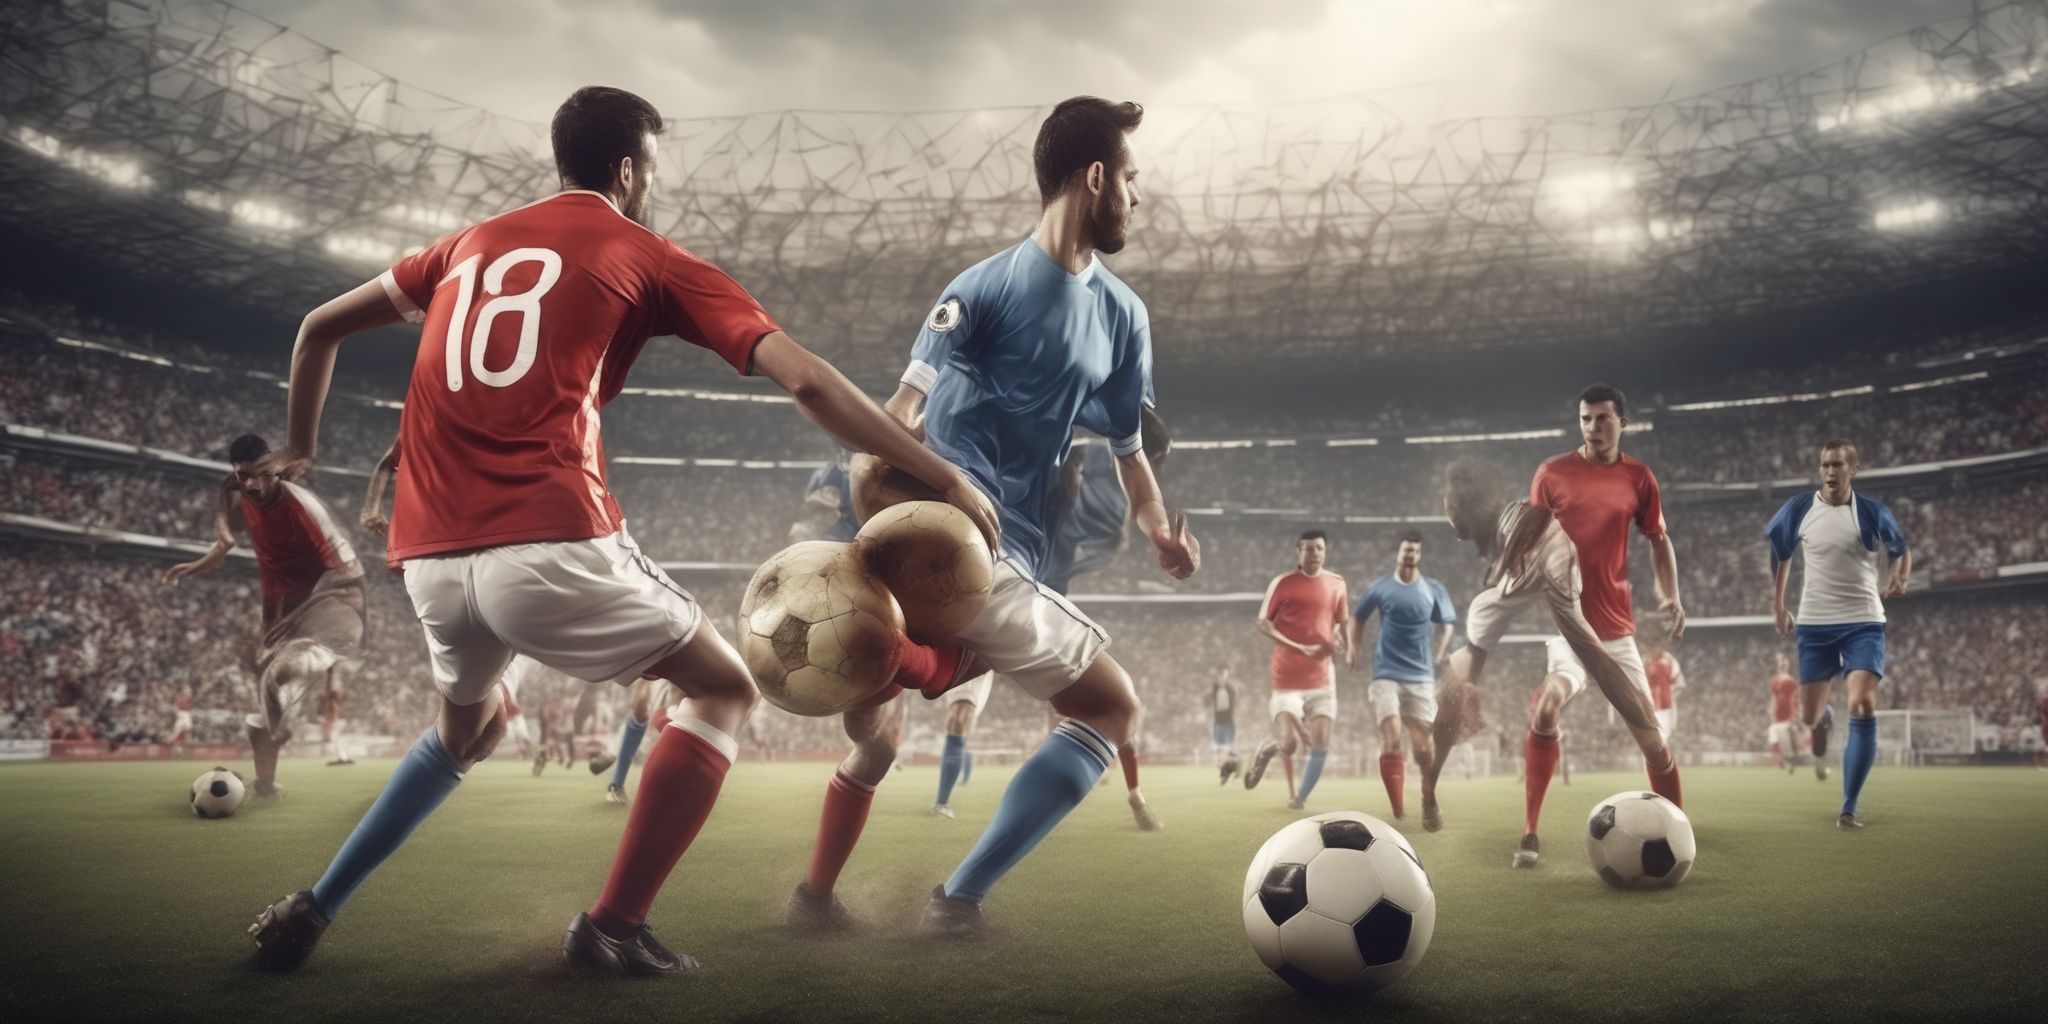 Football match  in realistic, photographic style